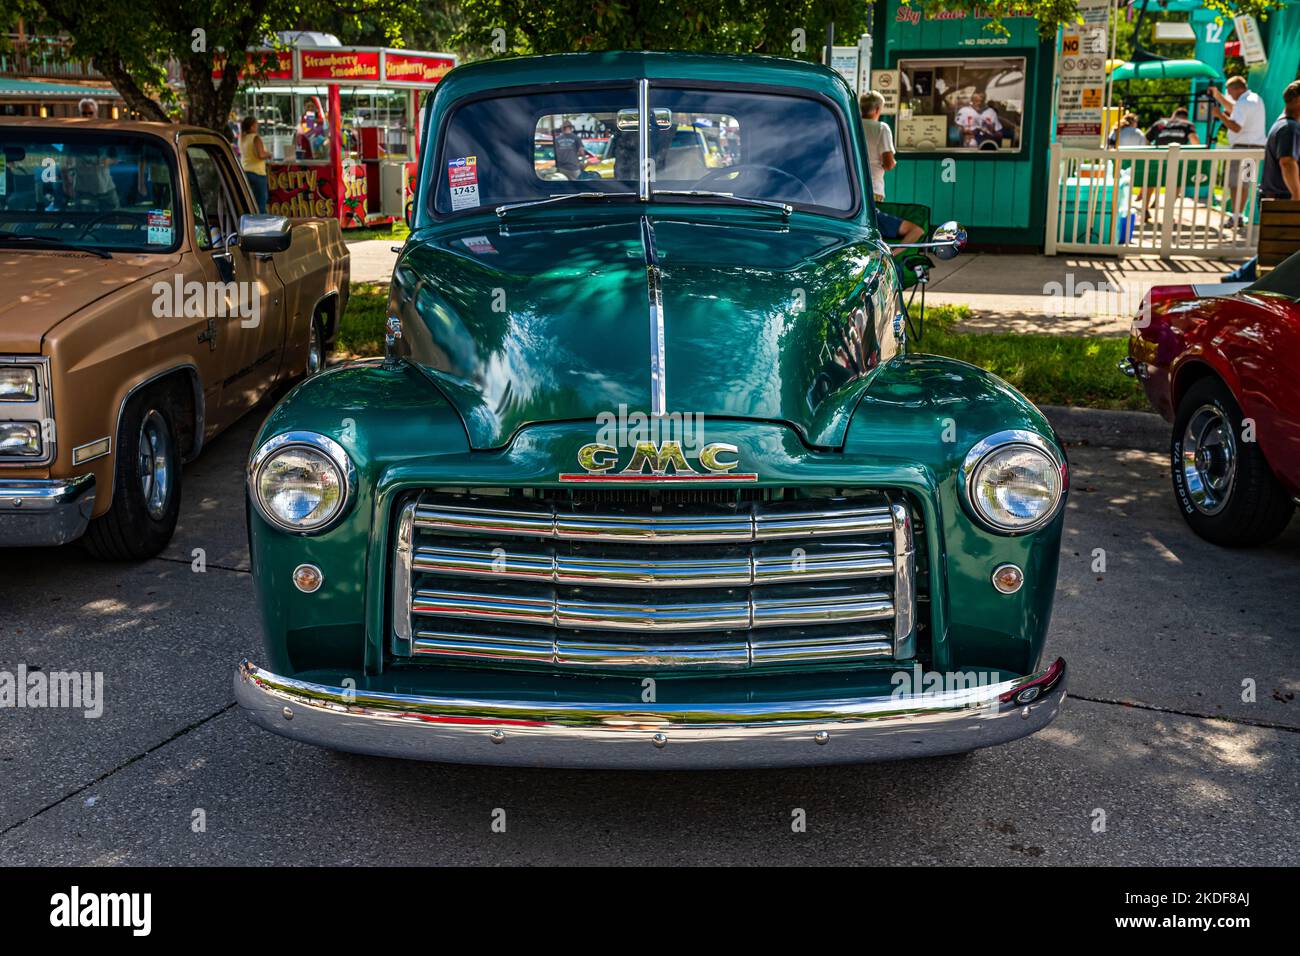 Des Moines, IA - July 01, 2022: High perspective front view of a 1949 GMC 100 Half Ton Pickup Truck at a local car show. Stock Photo